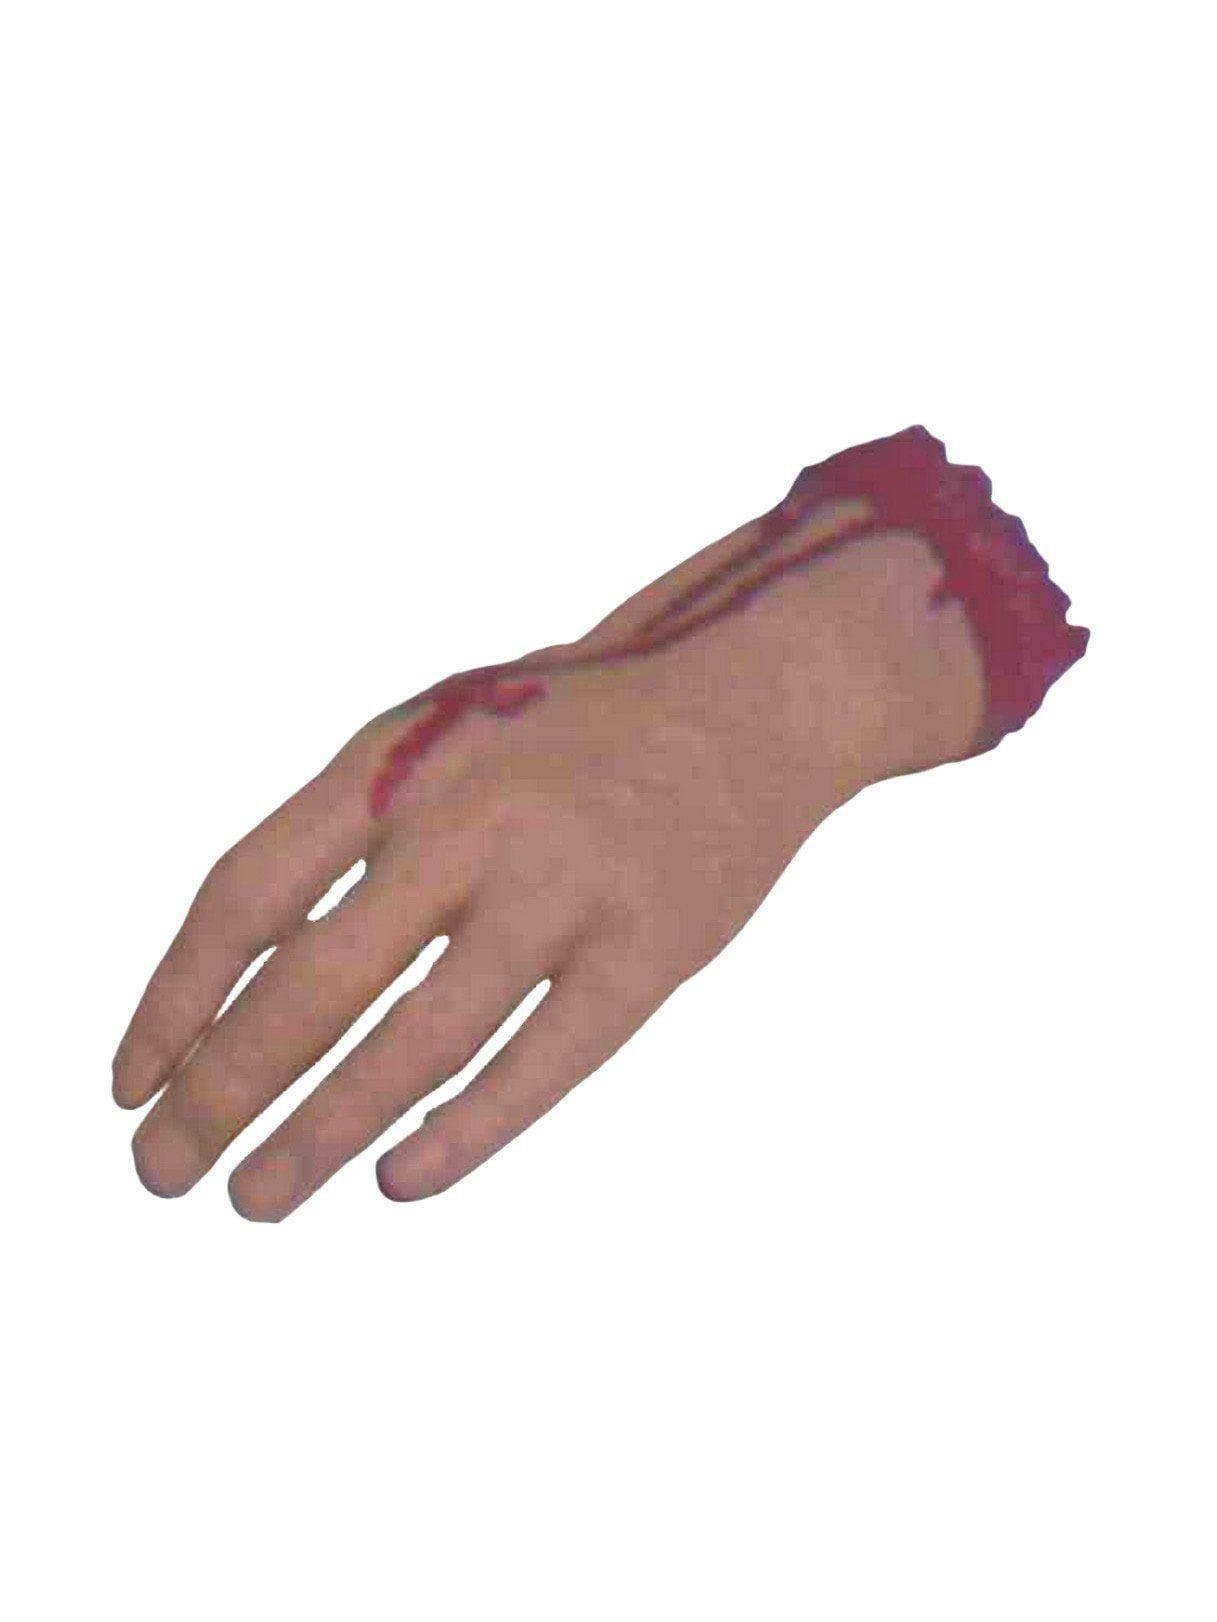 Bloody Severed Hand - costumes.com